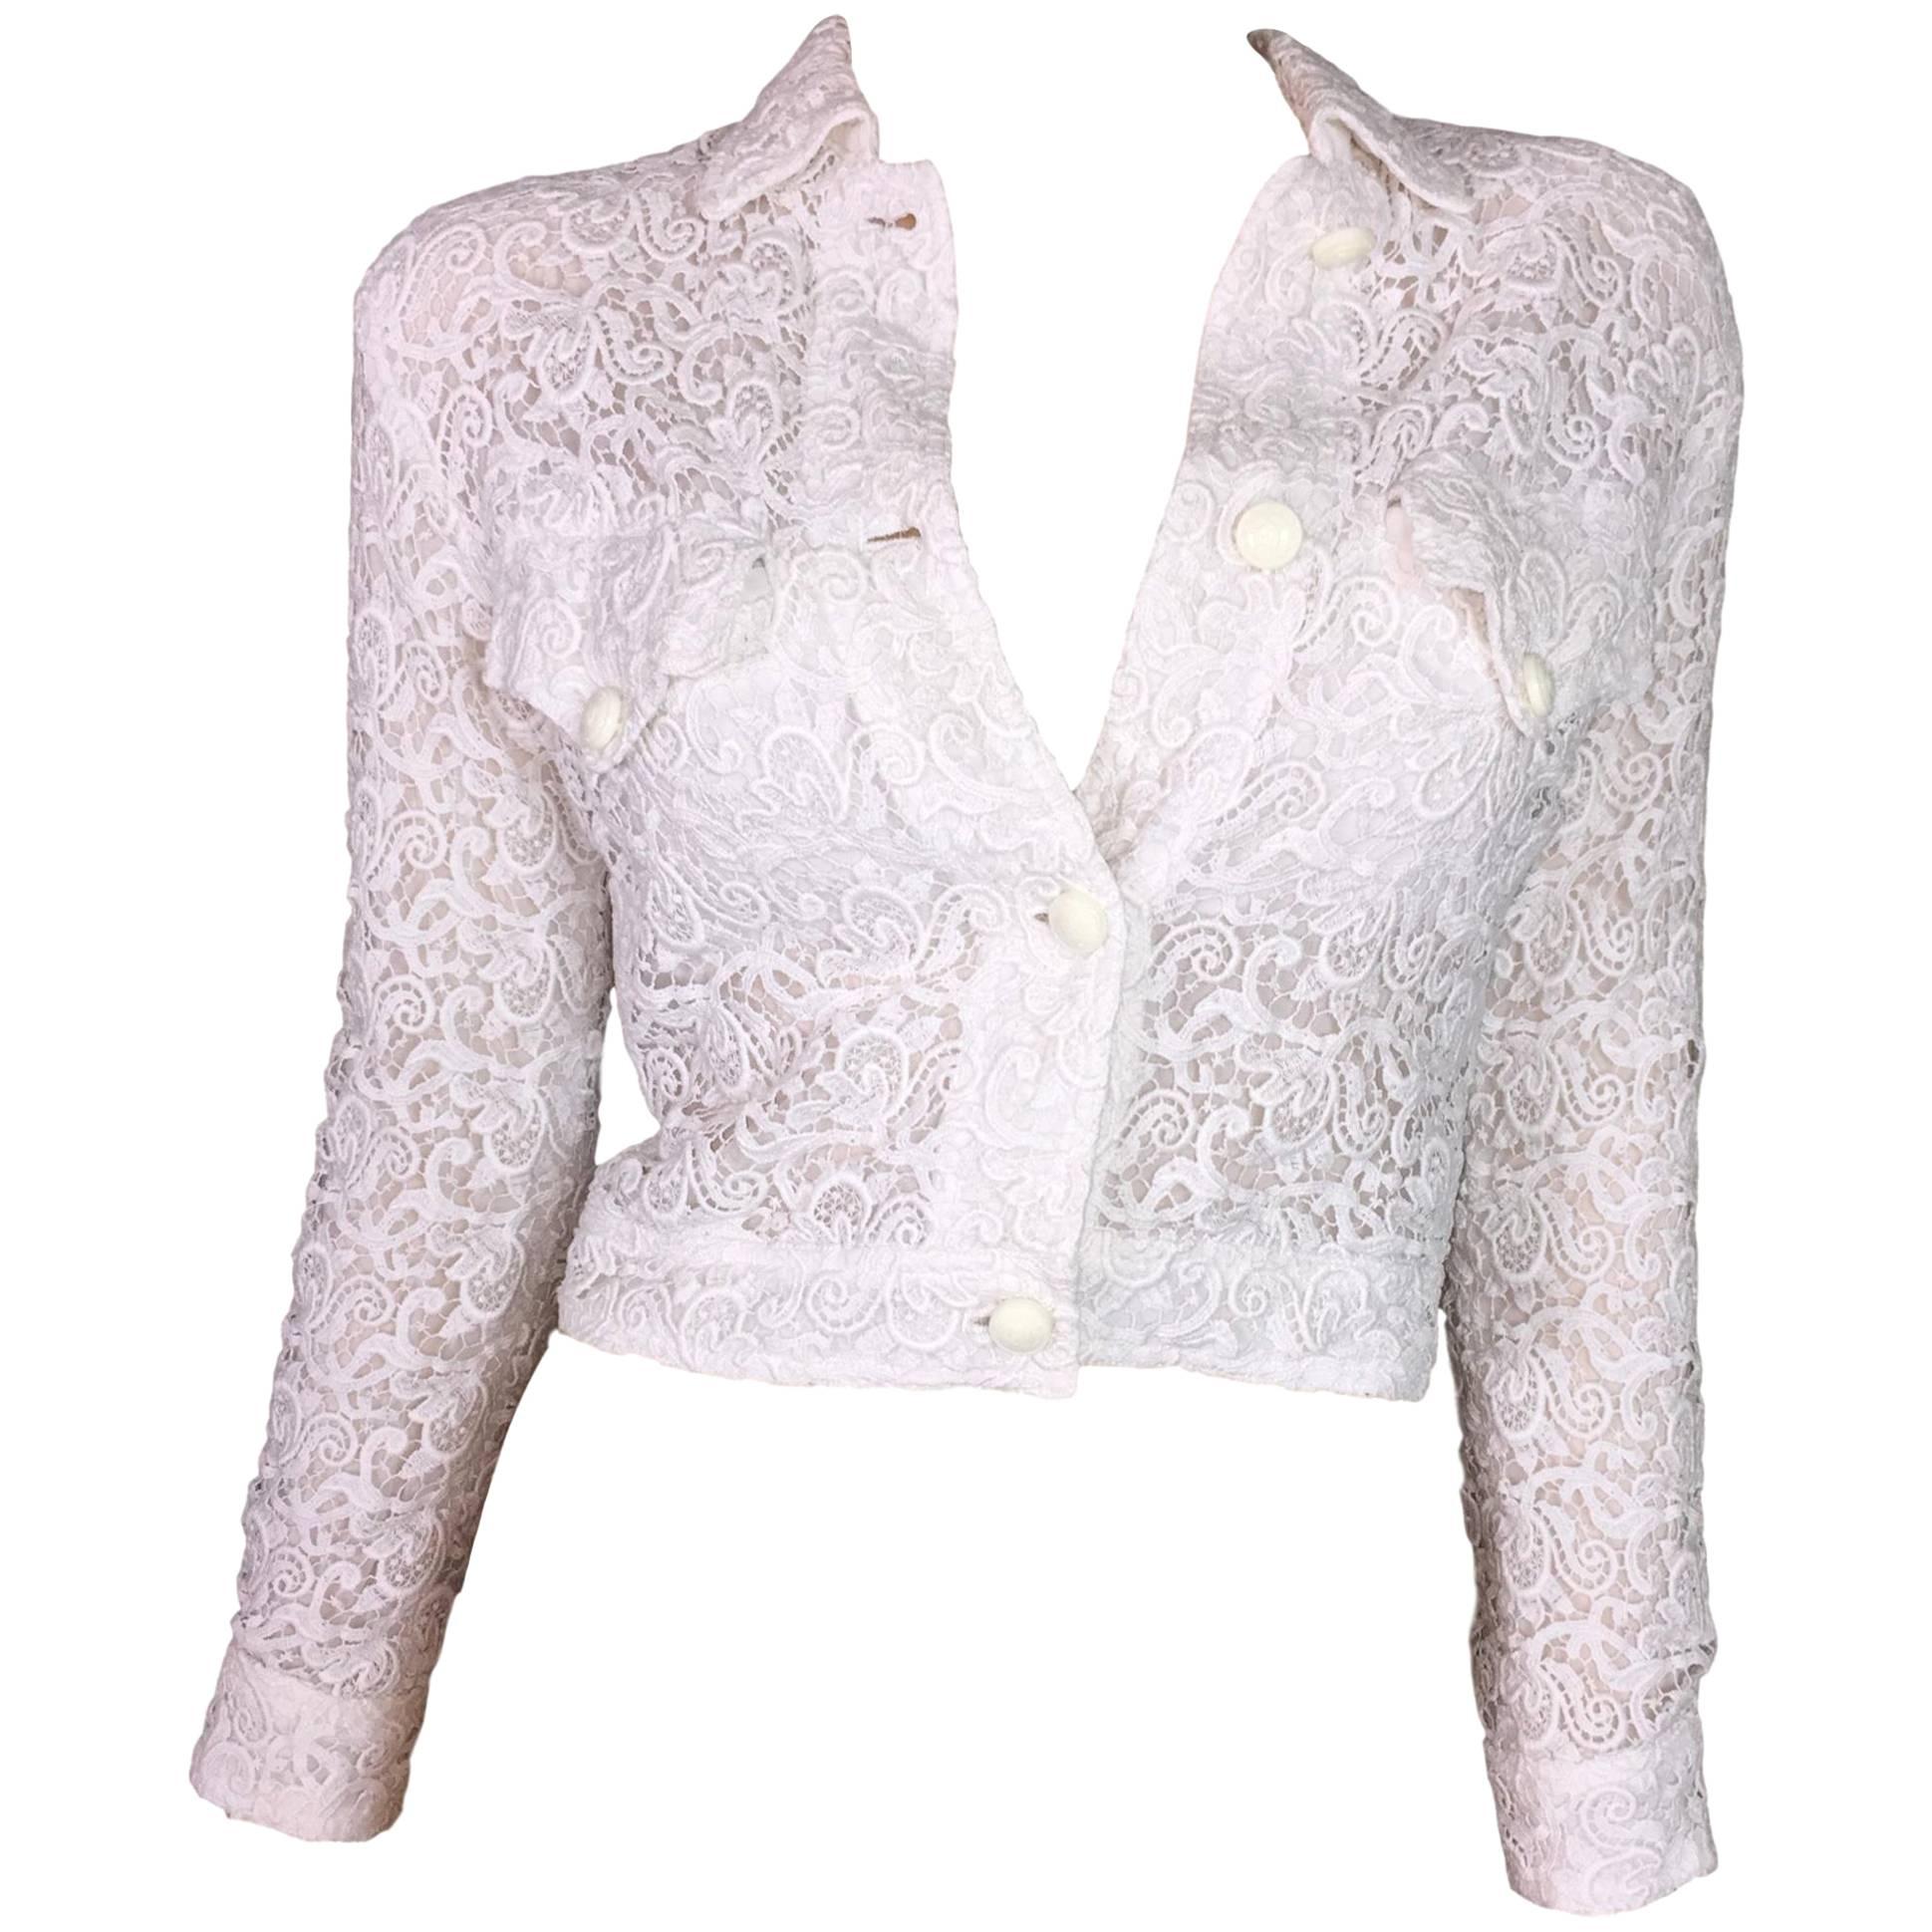 S/S 1994 Gianni Versace Sheer White Lace Cropped Short Jacket 38